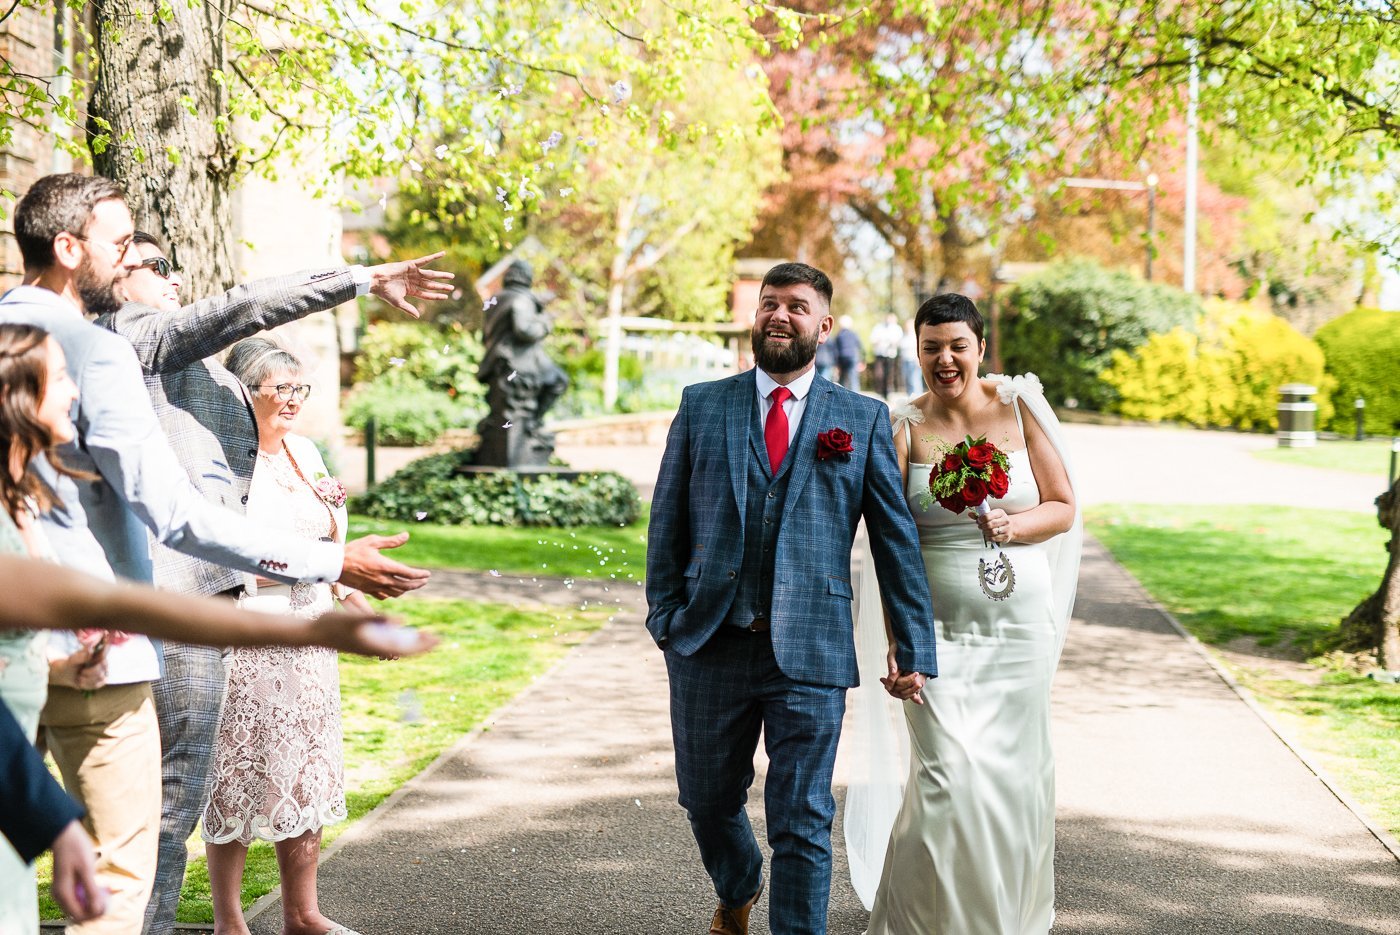 Beautiful bride Emily wore the Dion wedding dress and Campagne cape by Halfpenny London